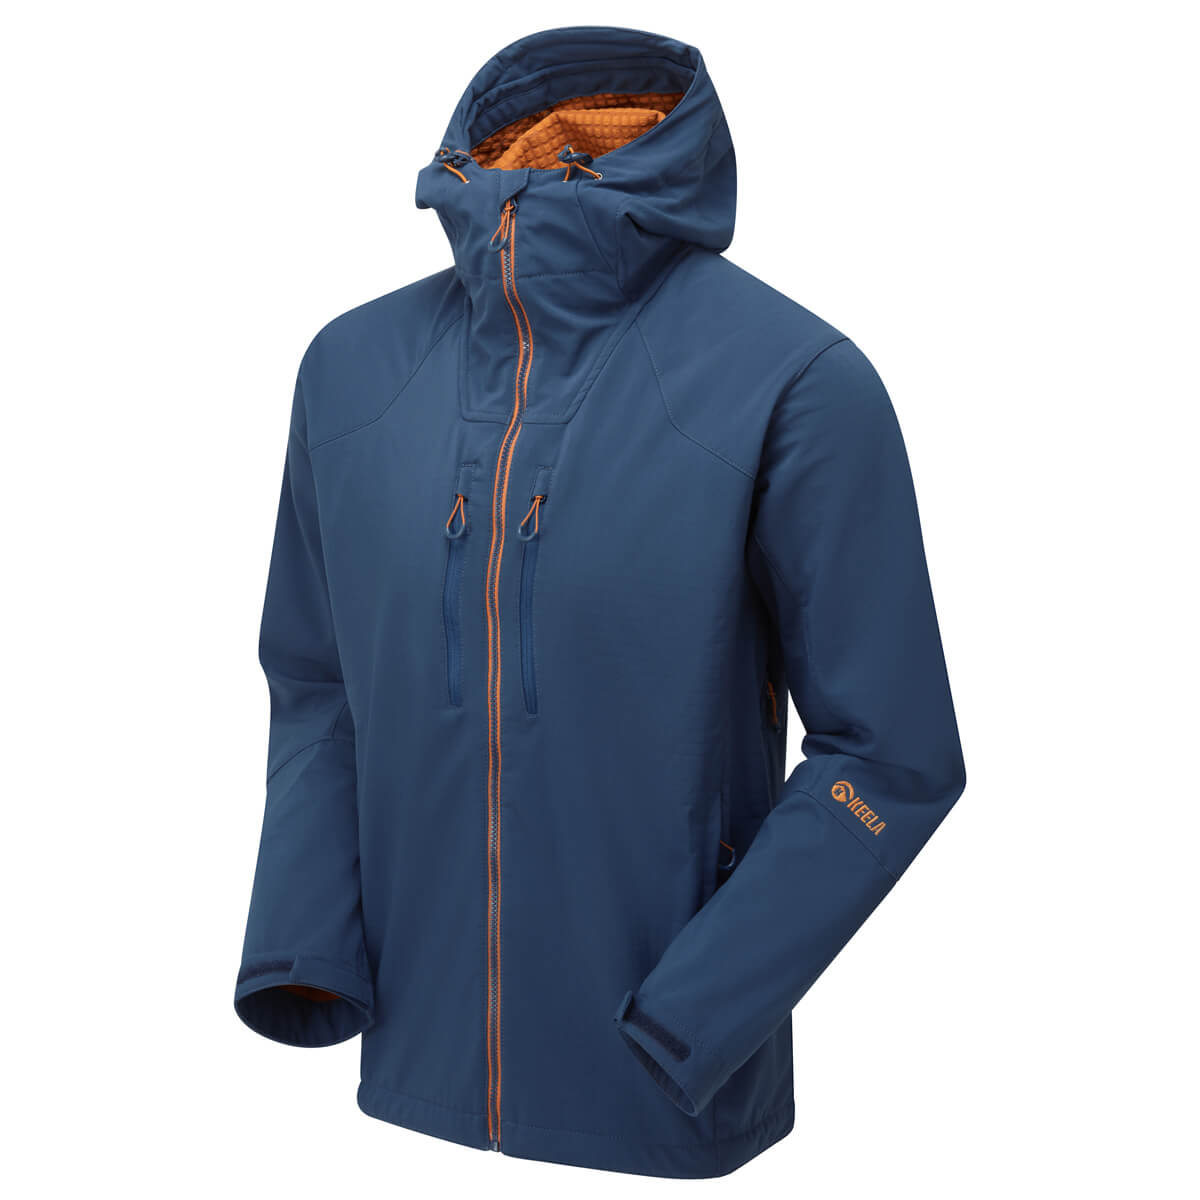 Hydron Softshell Jacket for Outdoor Enthusiasts looking for protection